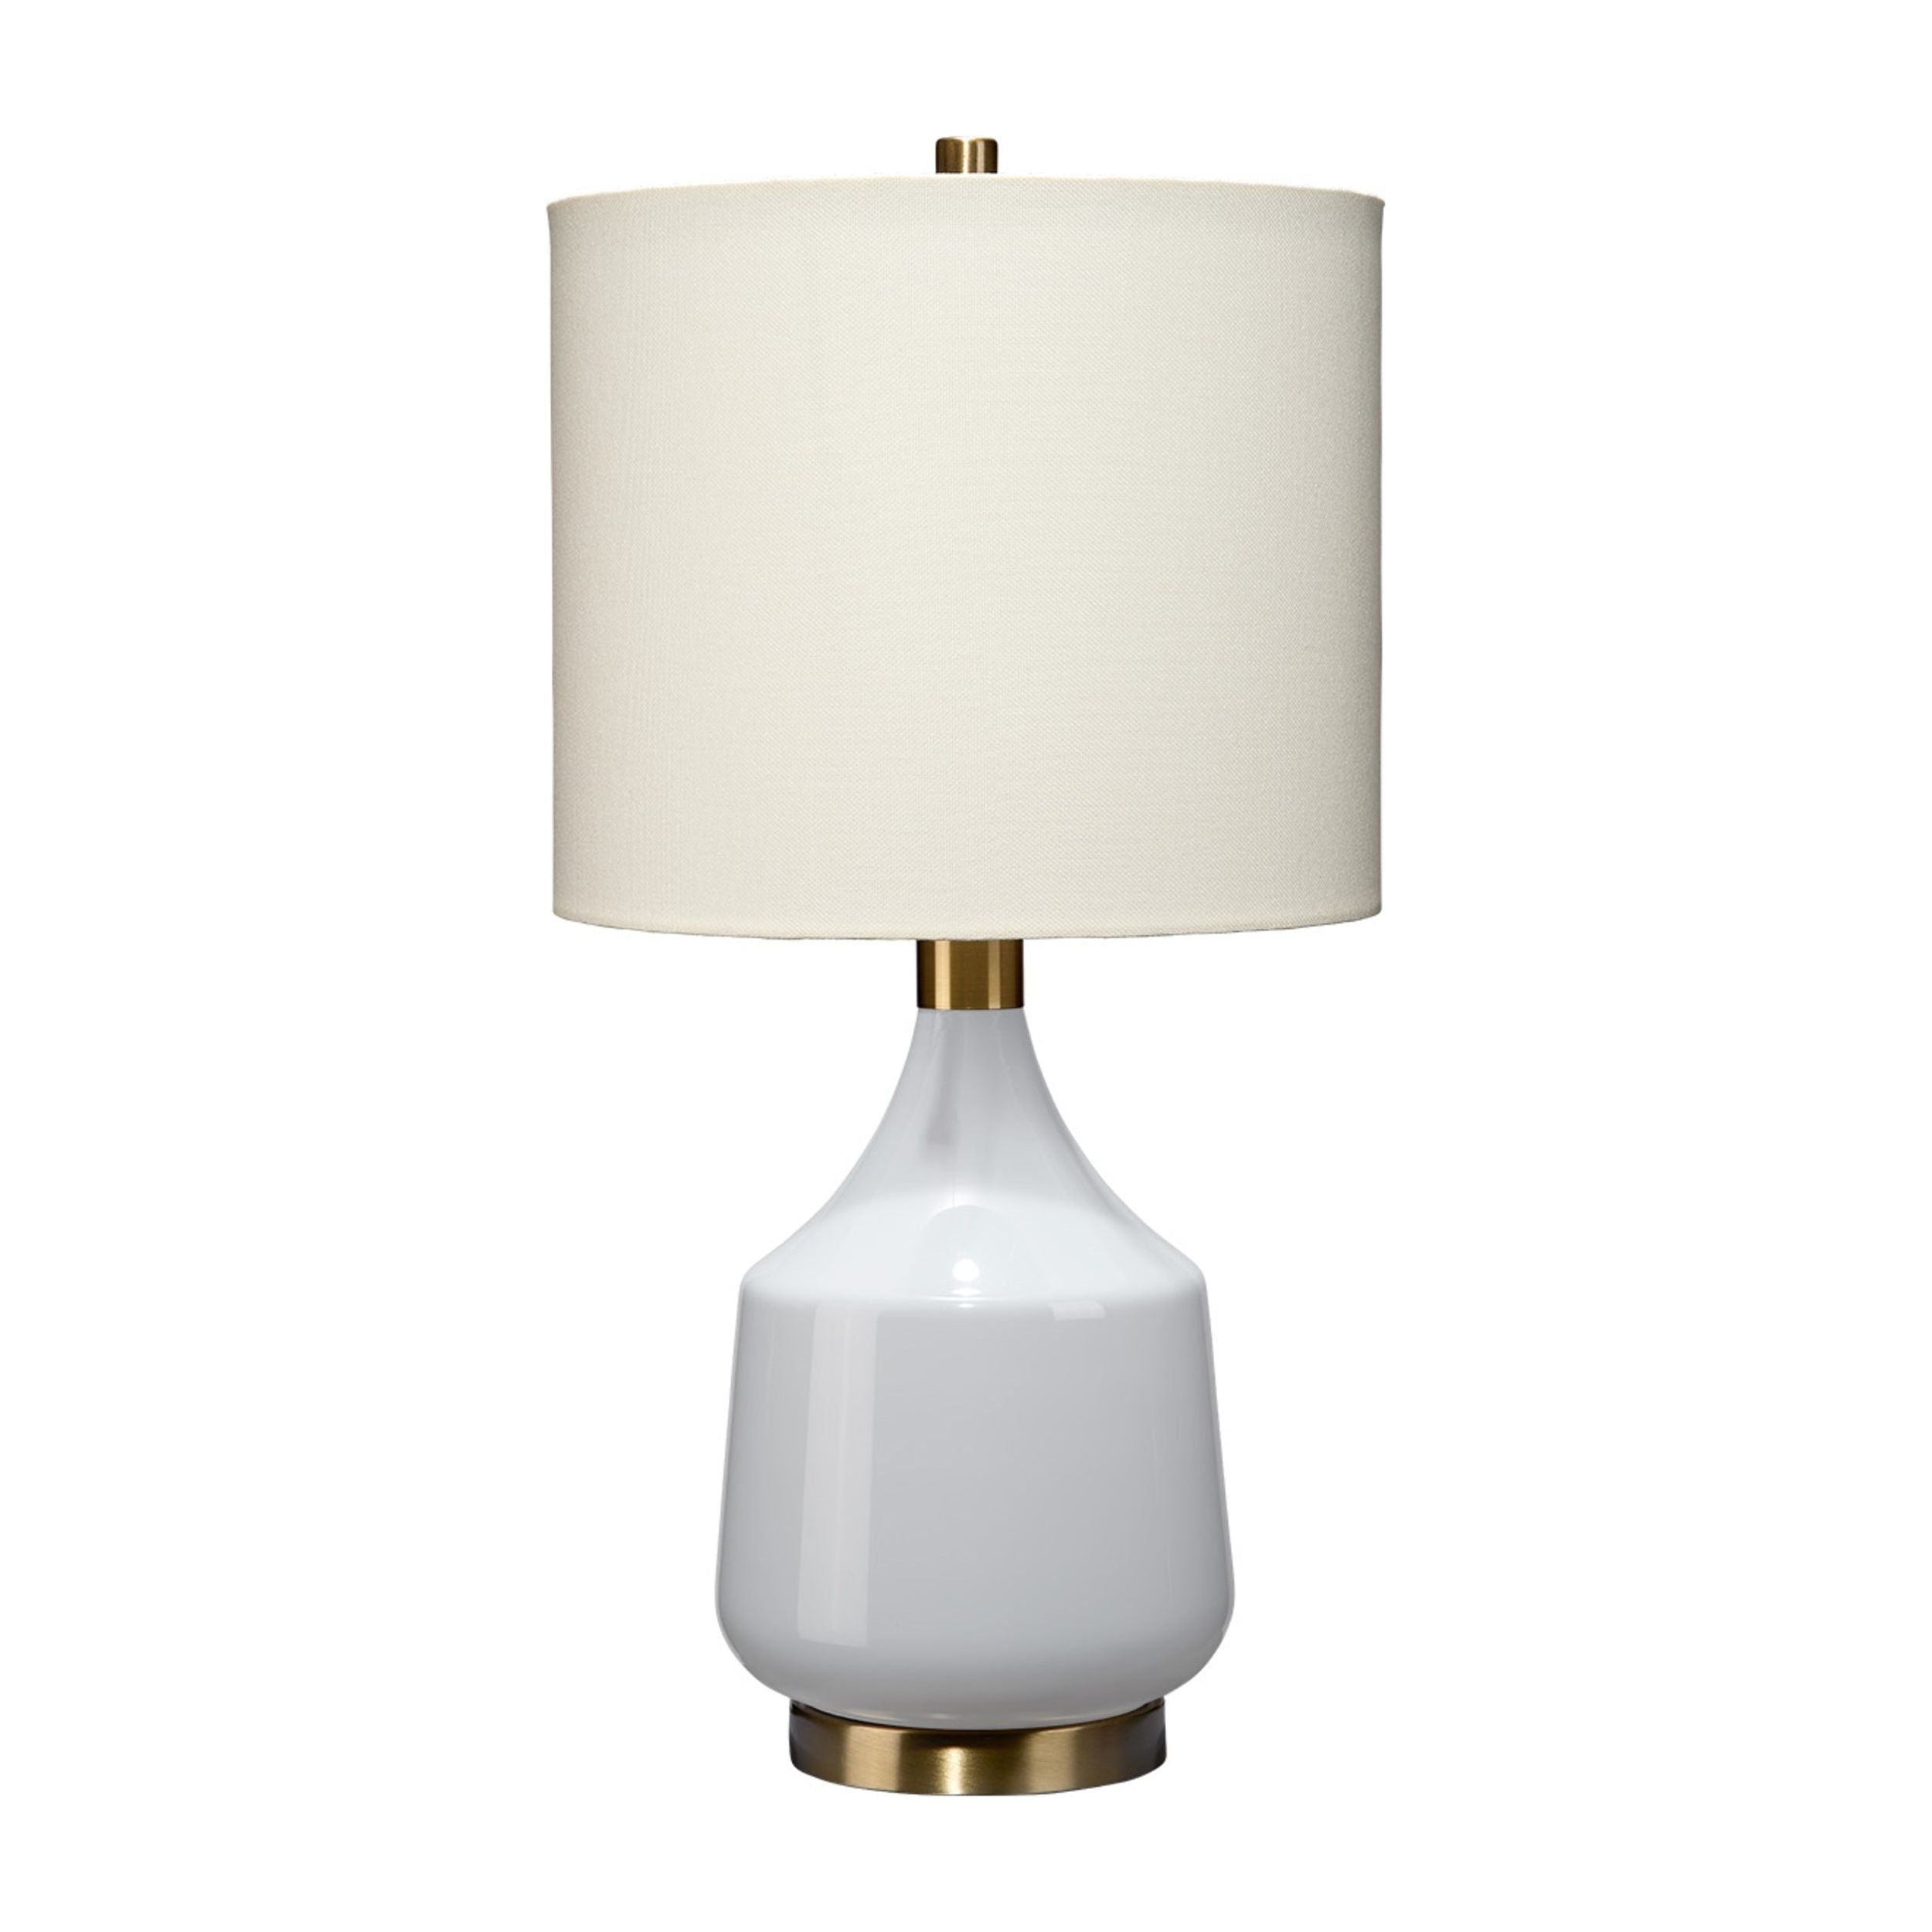 Jamie Young Company - LS9AMELIPBBR -  Amelia Table Lamp - Amelia - Pale Blue